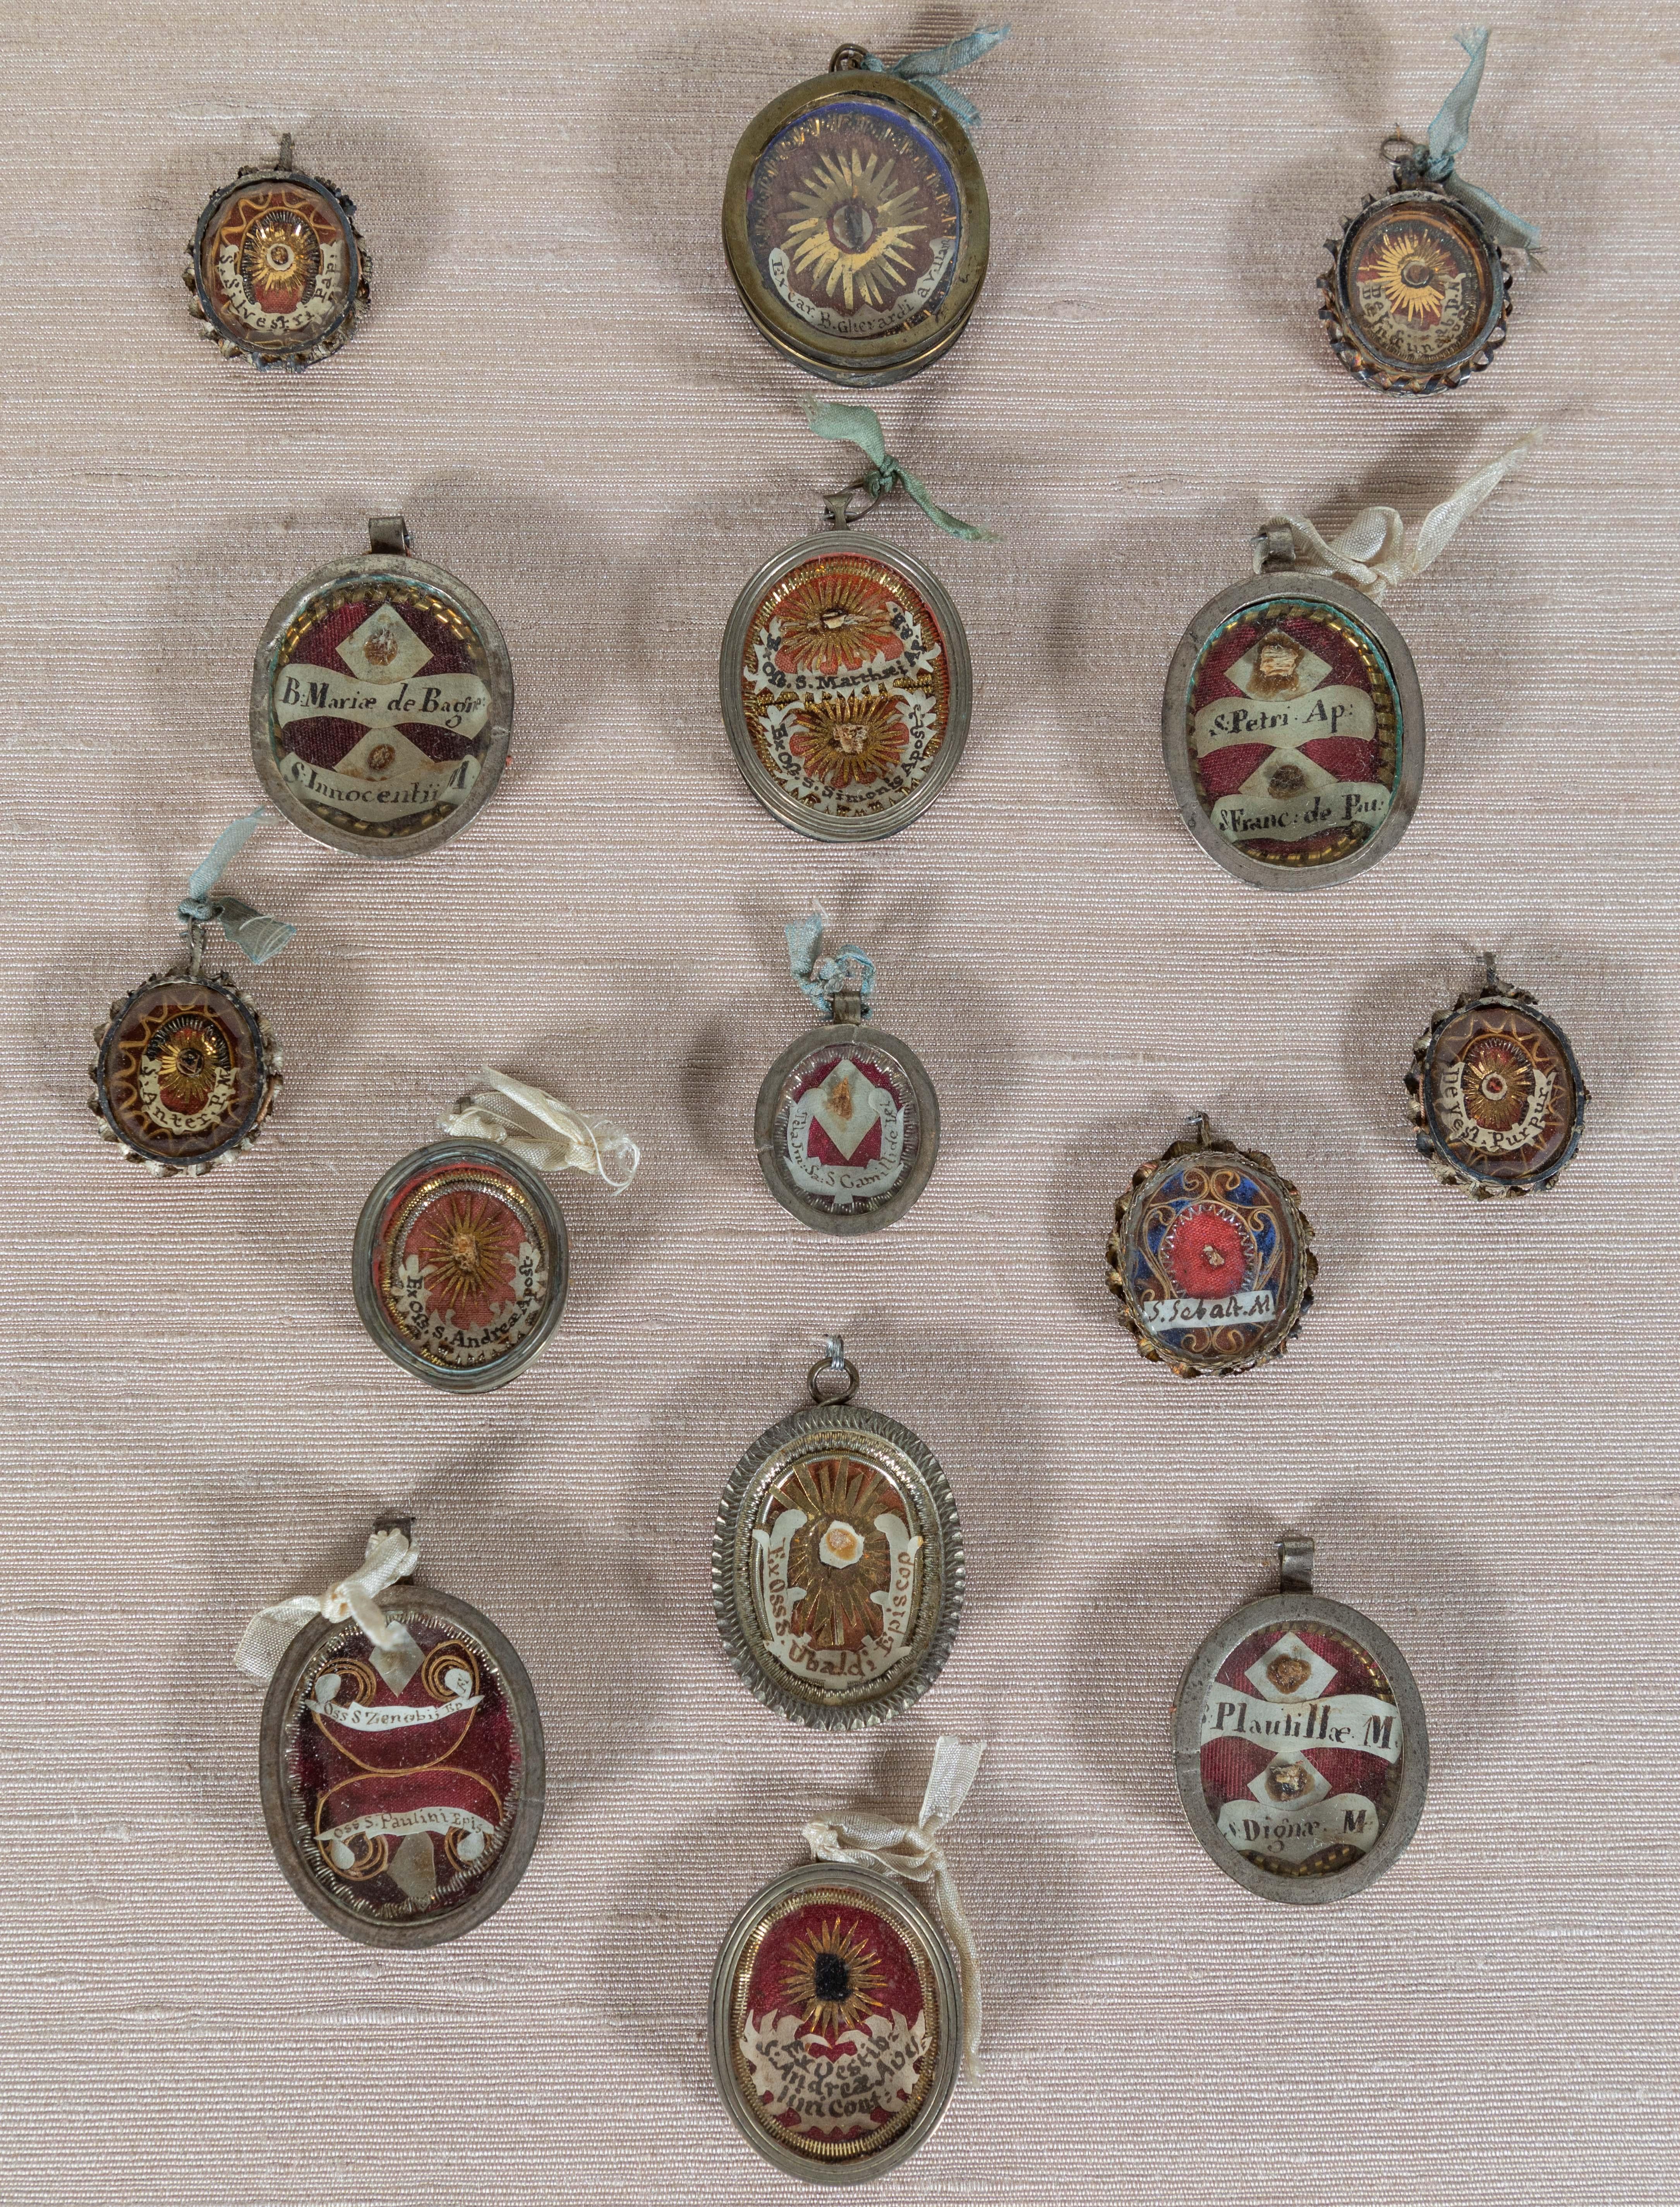 A remarkable collection of 15, Italian, circa 1650, metal framed, wax-sealed, glass front reliquaries inset with fabric fragments amid gilt metal, and hand-written, ink-on-parchment labels.